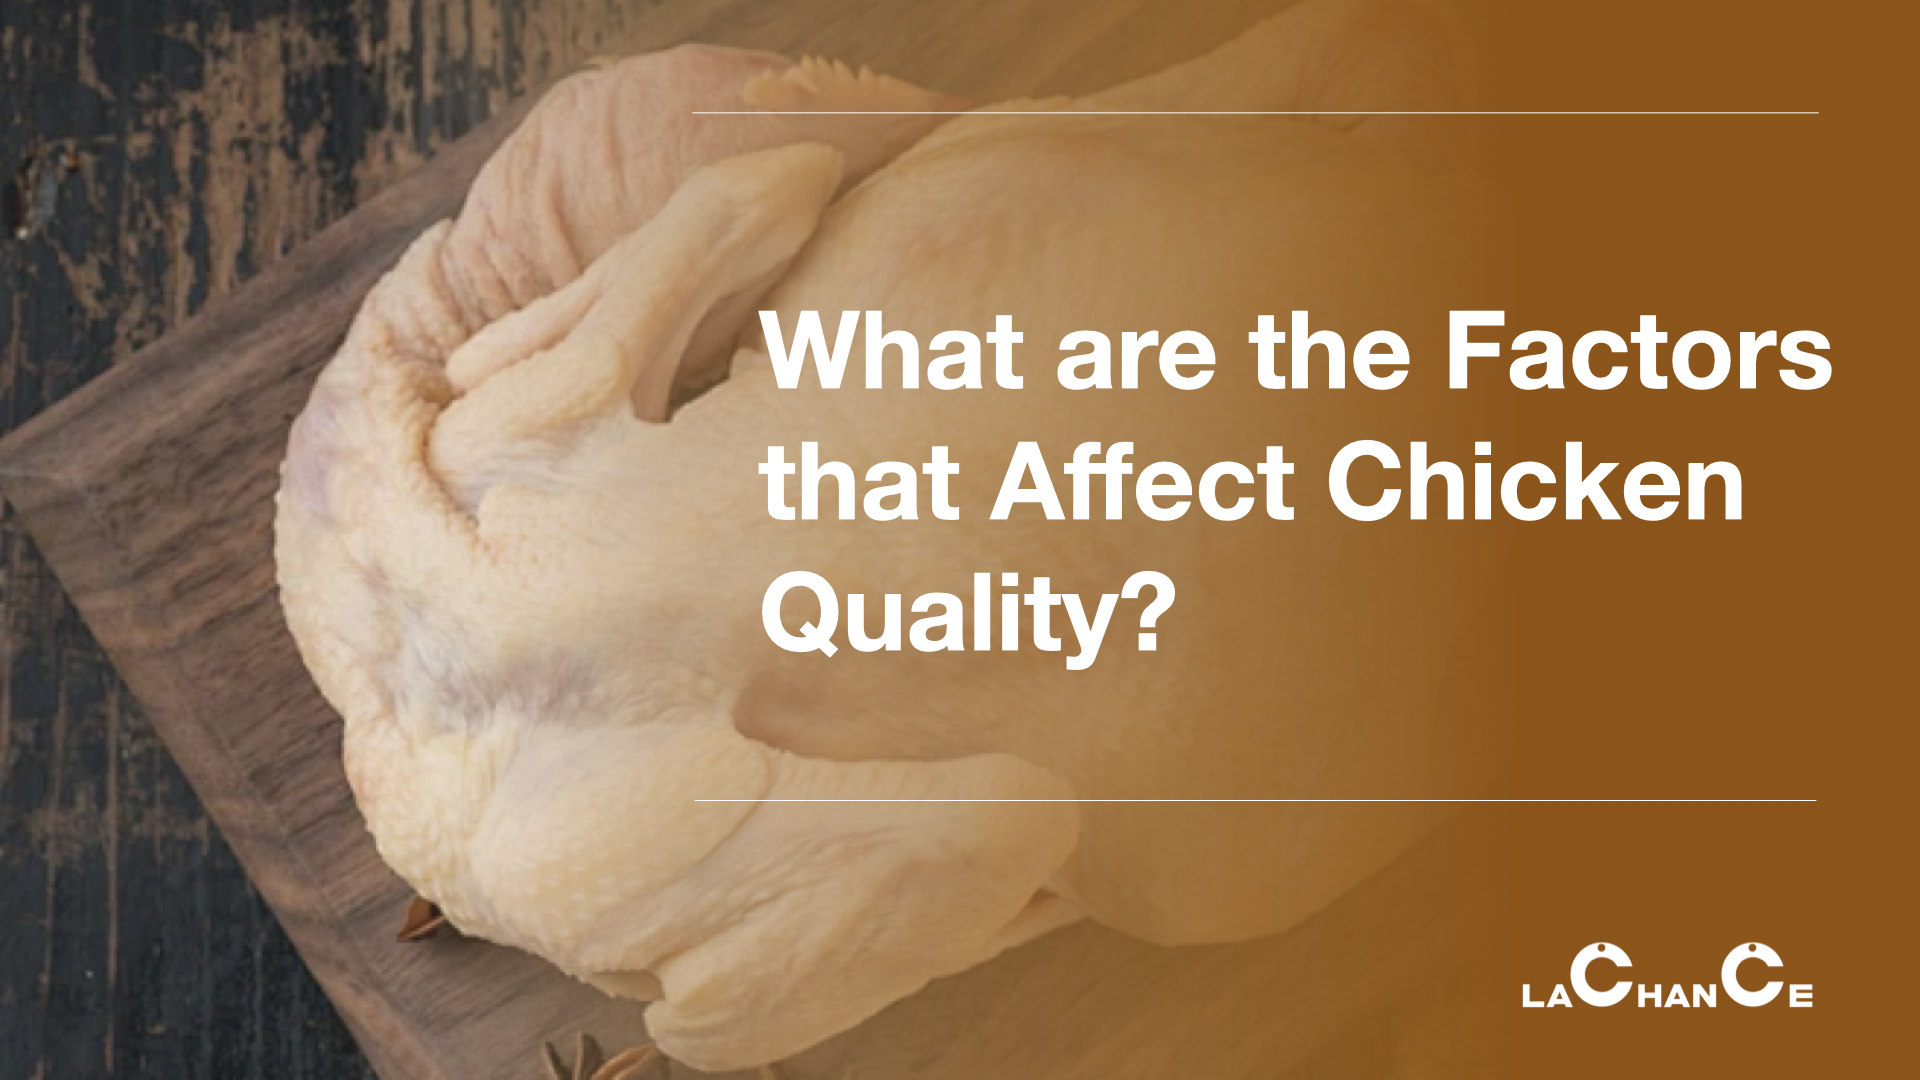 What are the factors that affect chicken quality?